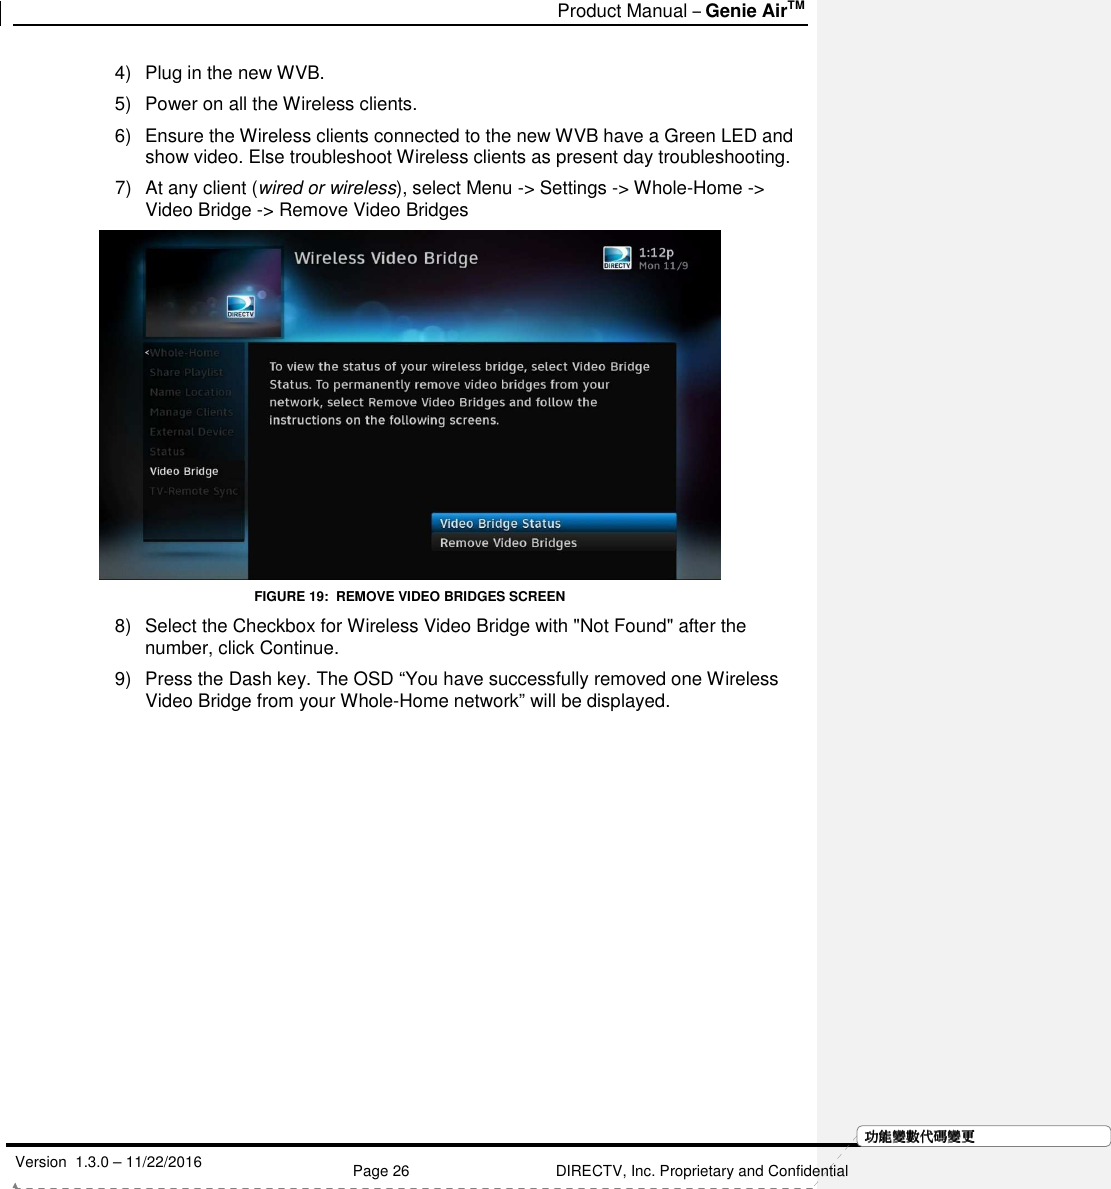   Product Manual – Genie AirTM   Version  1.3.0 – 11/22/2016    Page 26 DIRECTV, Inc. Proprietary and Confidential  功功功功能變能變能變能變數代數代數代數代碼變碼變碼變碼變更更更更4)  Plug in the new WVB. 5)  Power on all the Wireless clients. 6)  Ensure the Wireless clients connected to the new WVB have a Green LED and show video. Else troubleshoot Wireless clients as present day troubleshooting. 7)  At any client (wired or wireless), select Menu -&gt; Settings -&gt; Whole-Home -&gt; Video Bridge -&gt; Remove Video Bridges  FIGURE 19:  REMOVE VIDEO BRIDGES SCREEN 8)  Select the Checkbox for Wireless Video Bridge with &quot;Not Found&quot; after the number, click Continue. 9)  Press the Dash key. The OSD “You have successfully removed one Wireless Video Bridge from your Whole-Home network” will be displayed. 